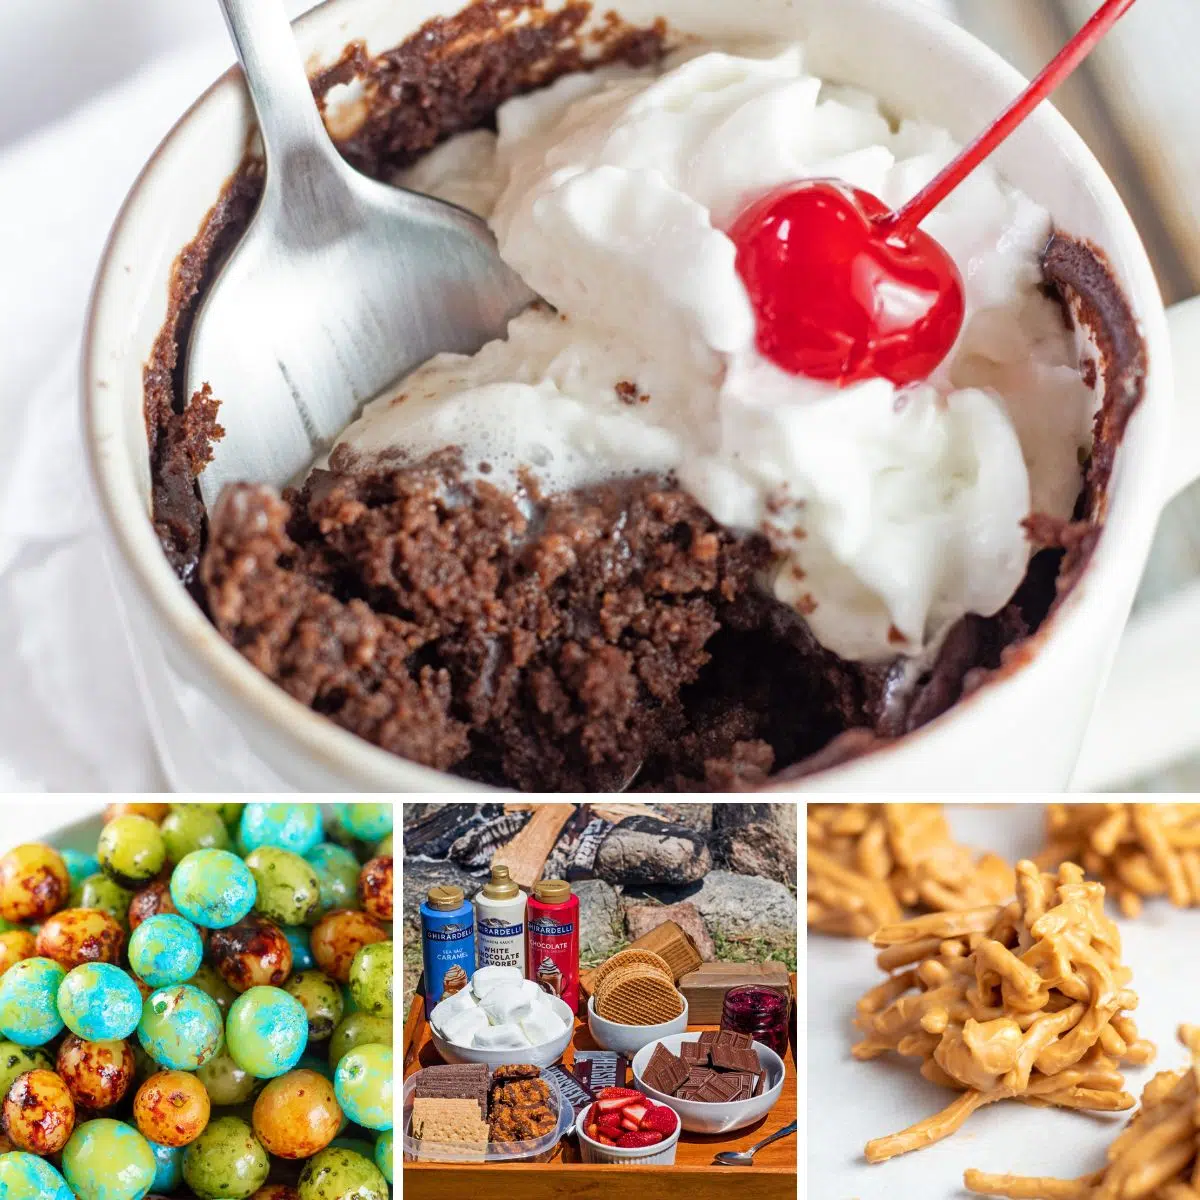 The best easy dessert recipes collection with a collage image featuring 4 tasty treats to make.